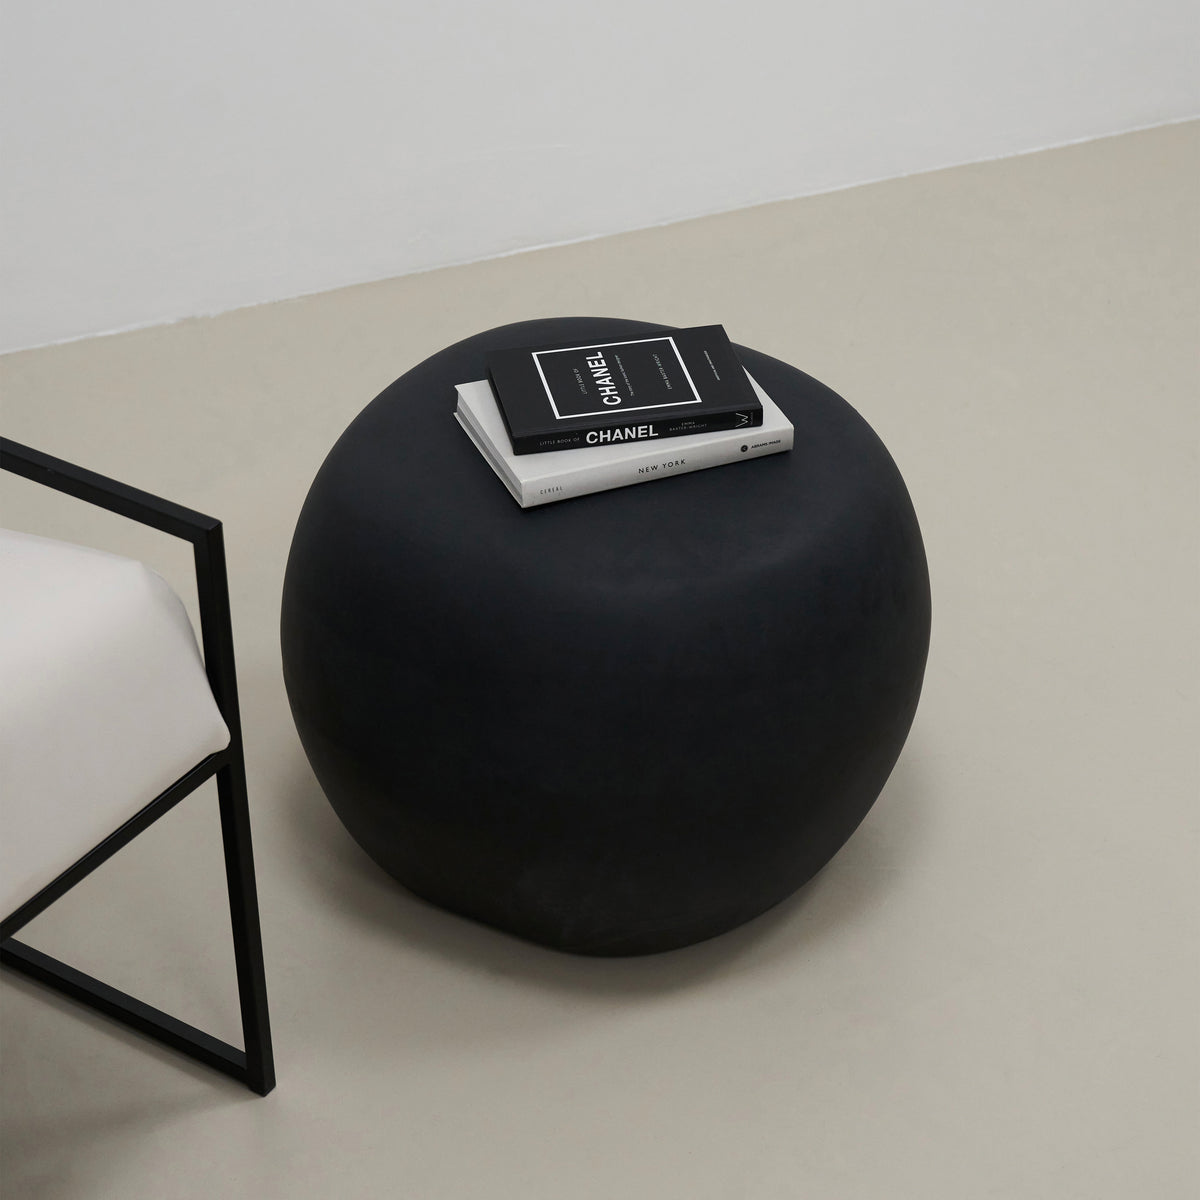 Minimal Onyx Pebble Side Table adorned with books